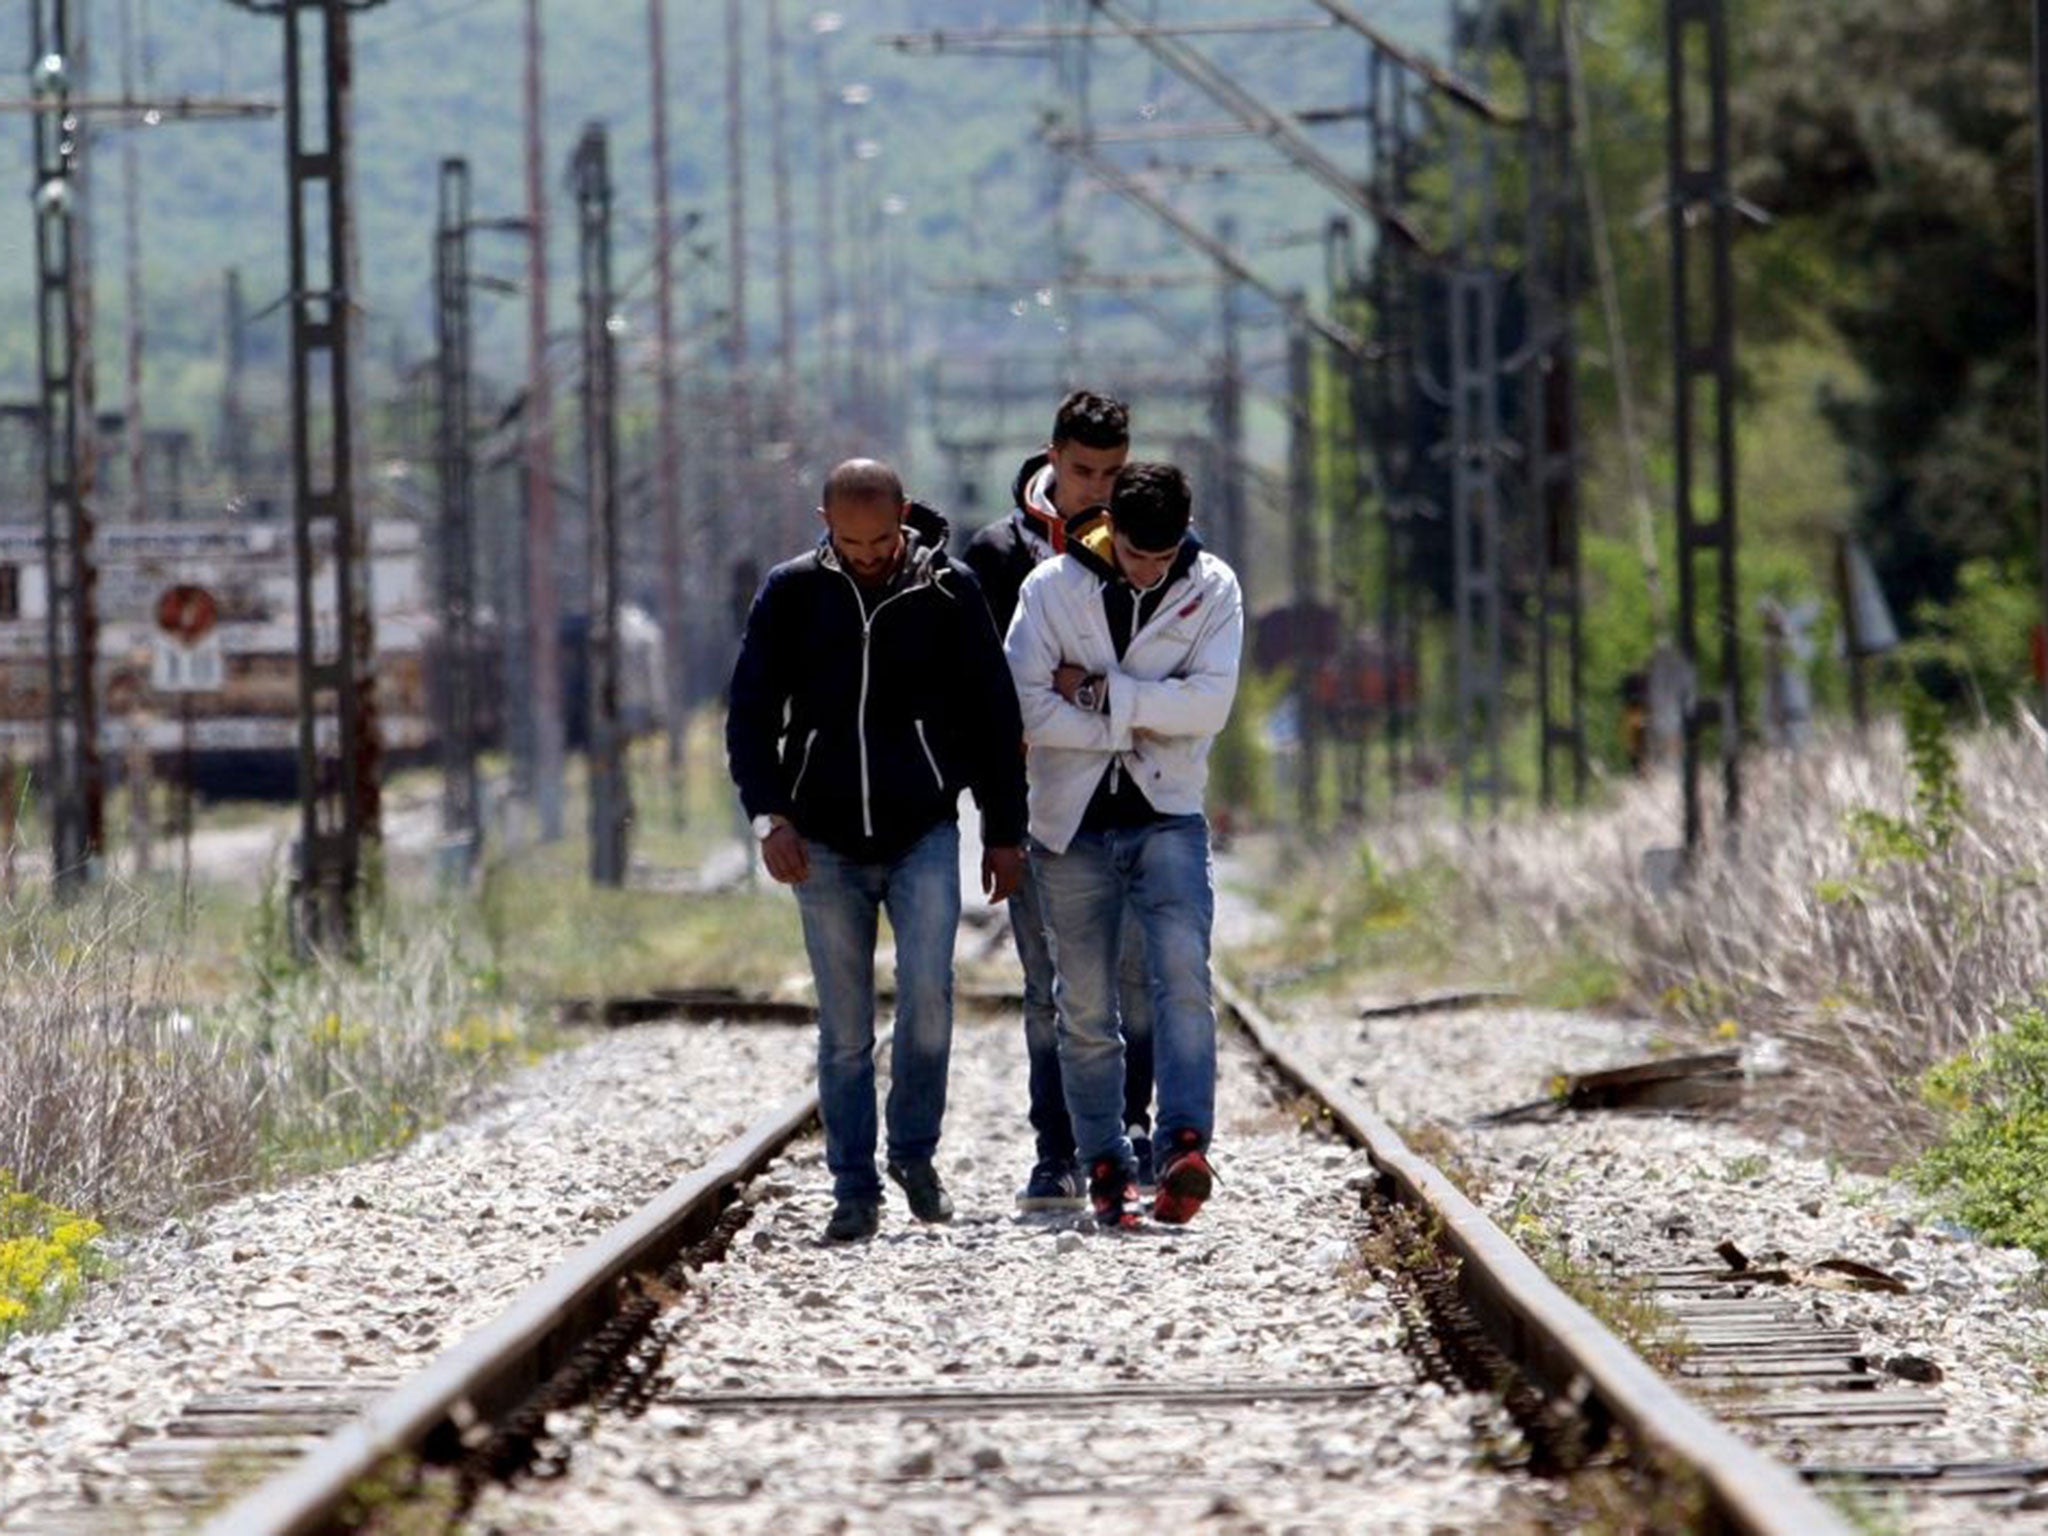 Migrants from Syria cross the railways at the border post of Idomeni at the Greece-Macedonia border on April 21